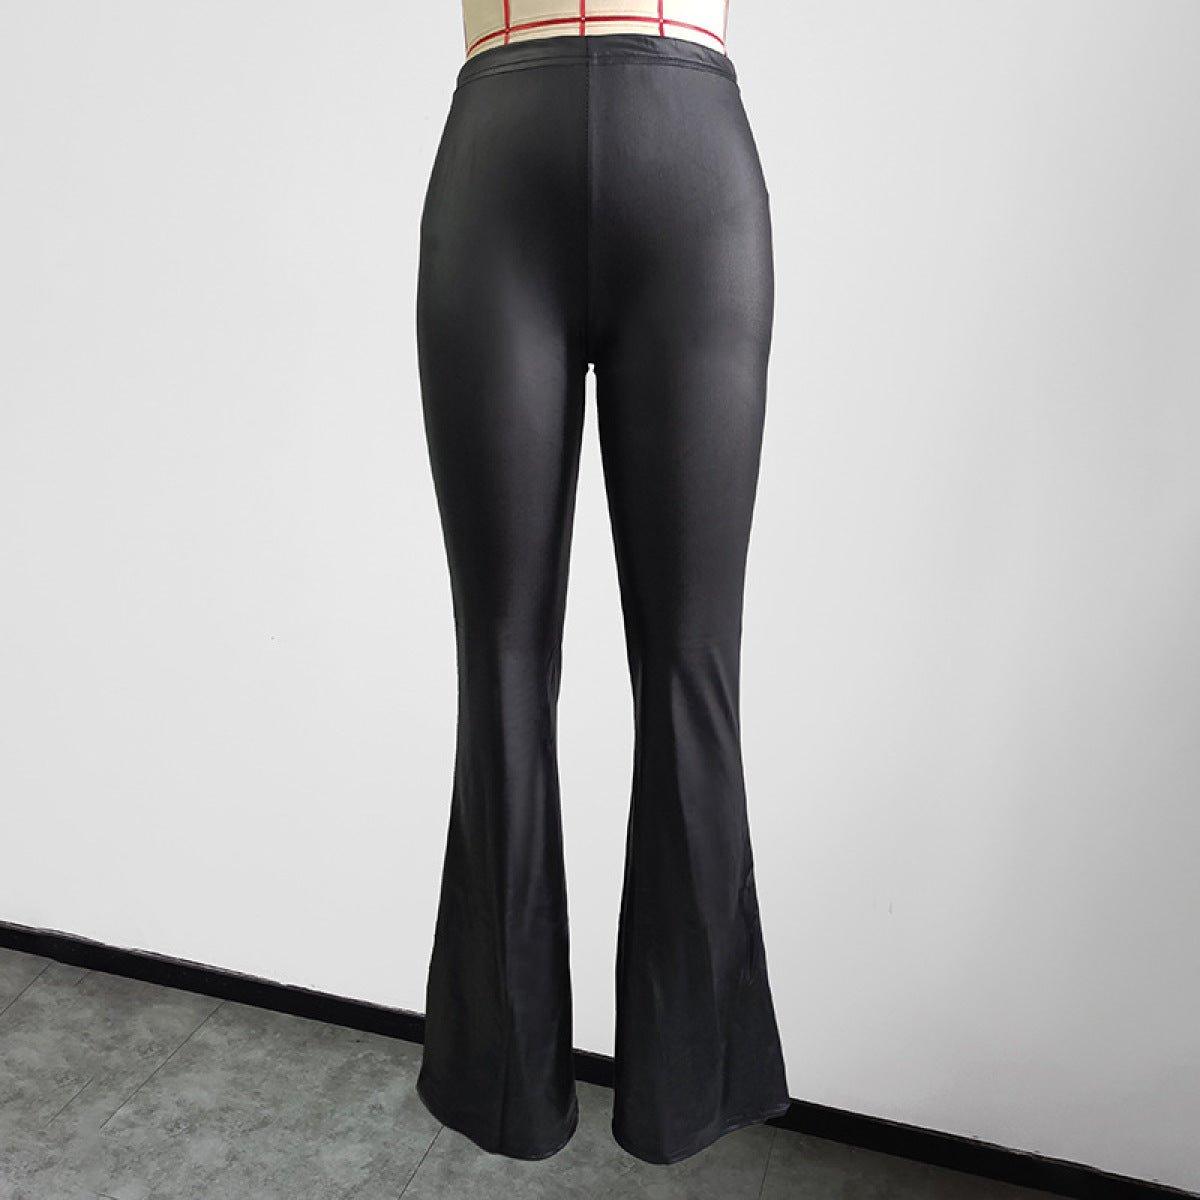 Black Faux Leather Flared Pant High Waist Sexy